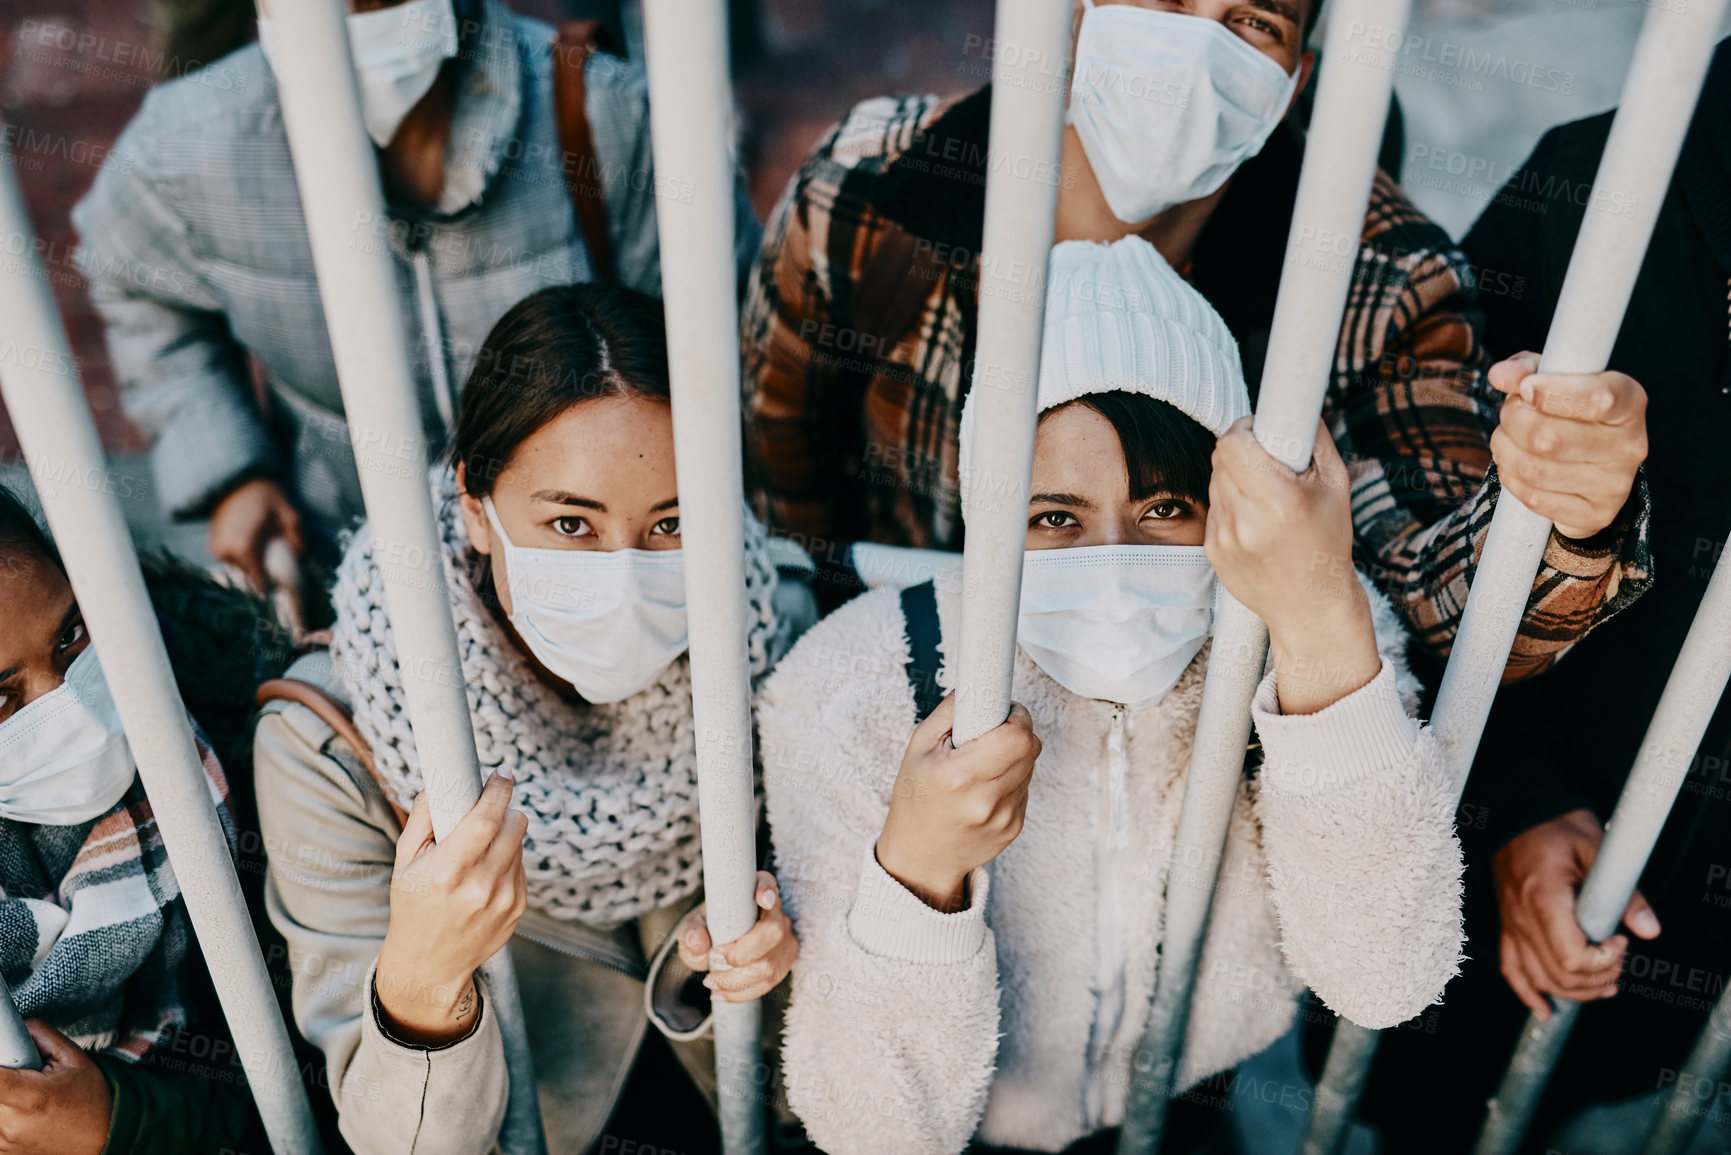 Buy stock photo Covid travel ban, lockdown or border control to prevent spread of pandemic virus, contagious disease or illness. Portrait of prisoners in masks facing racism and discrimination behind locked gate